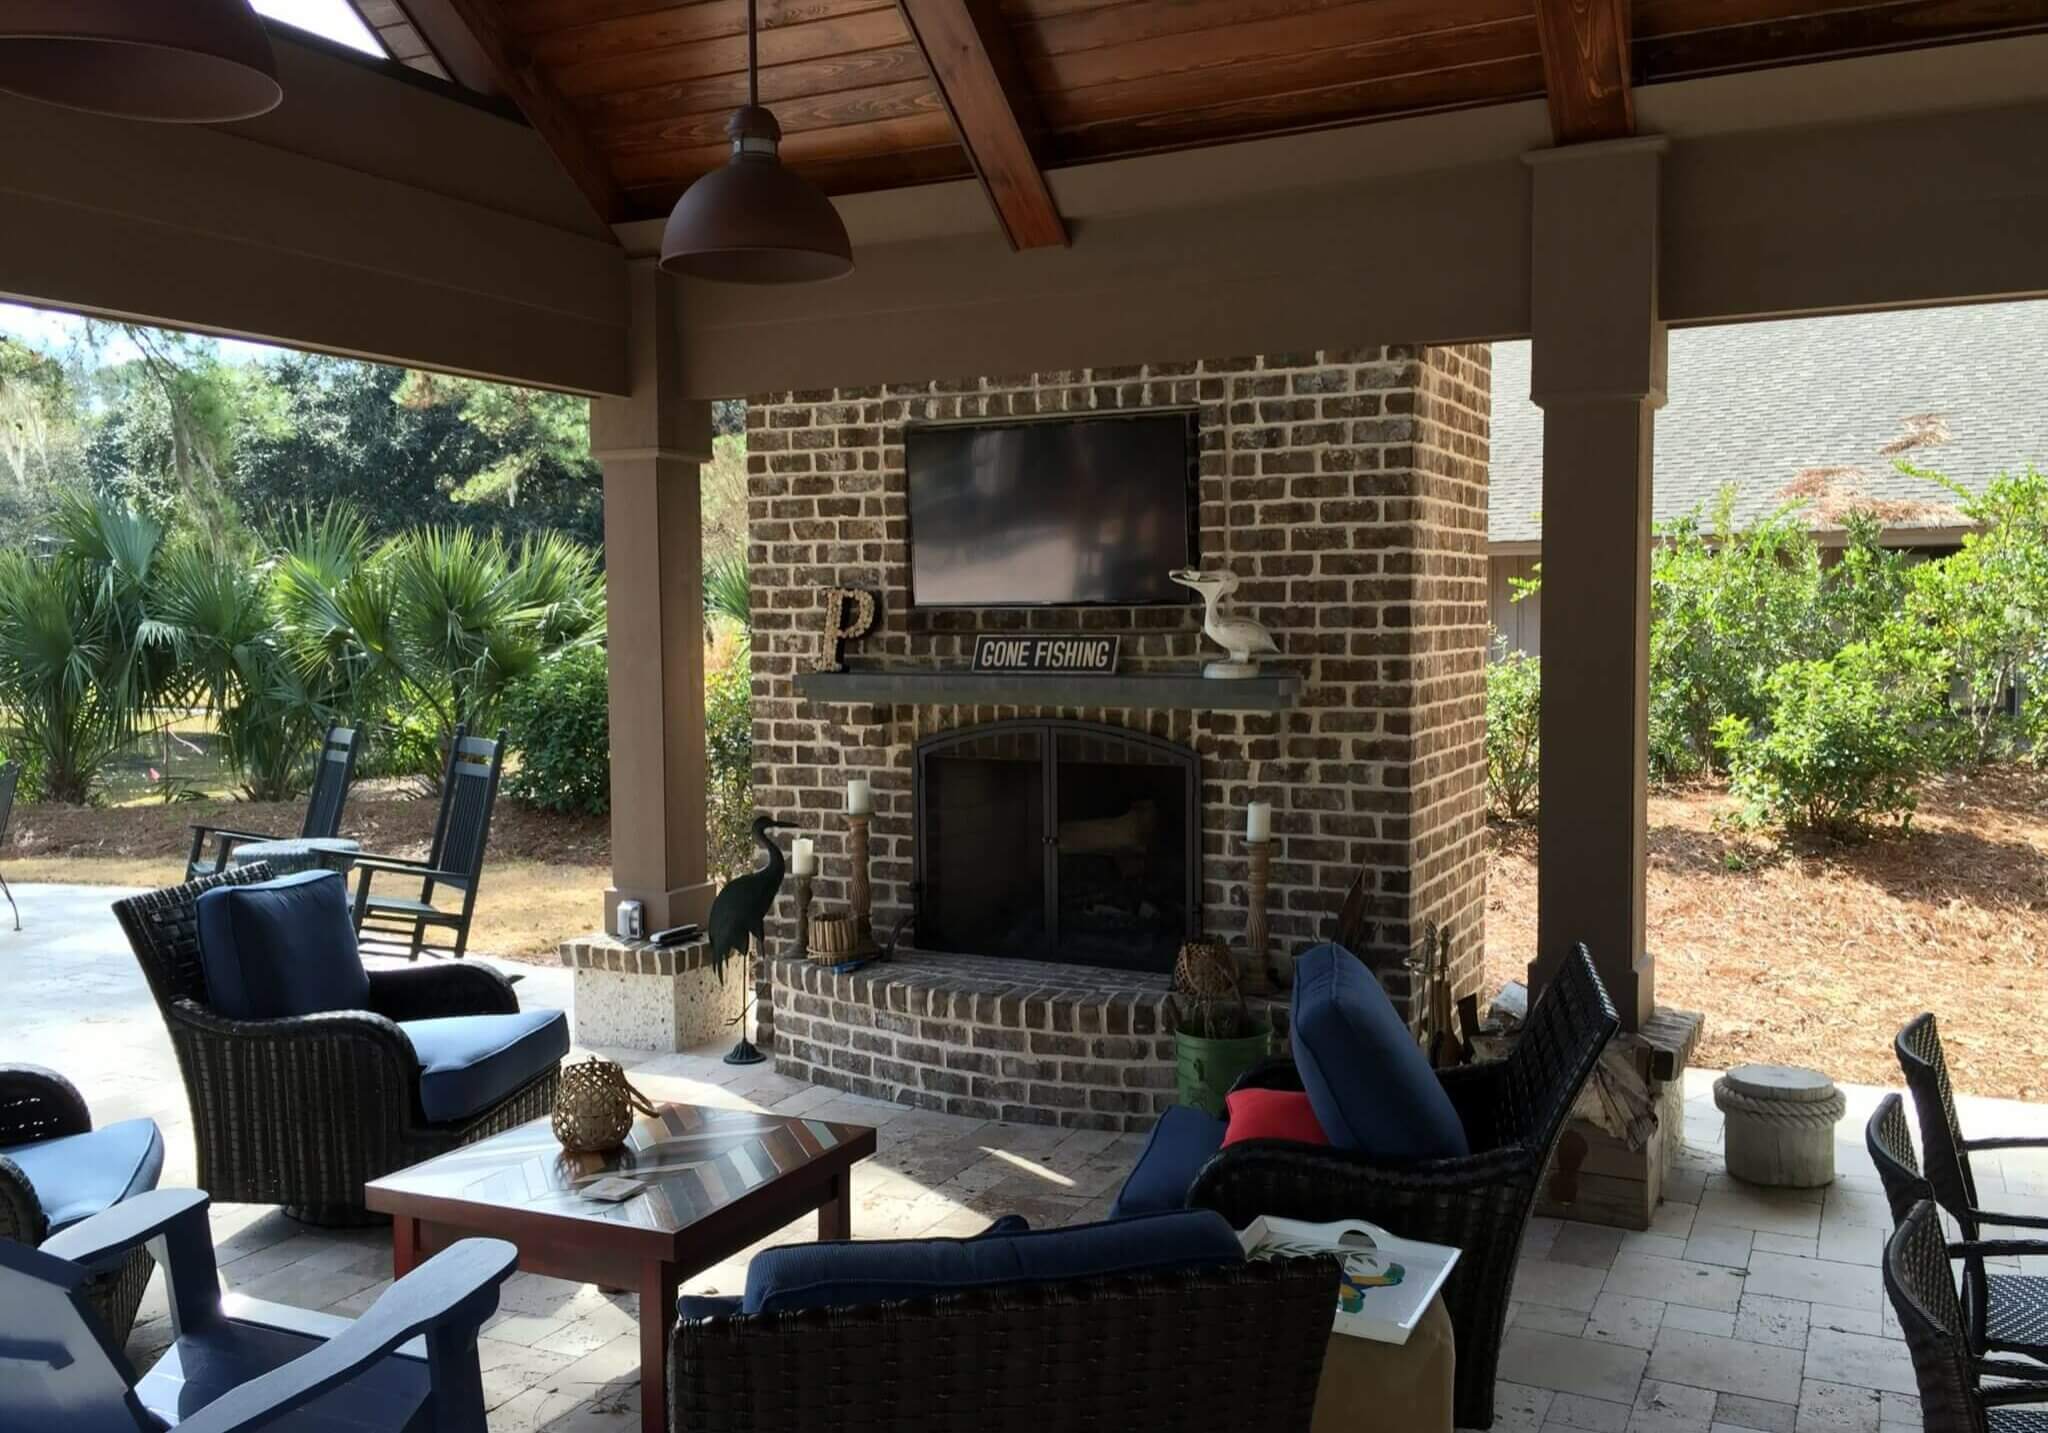 Hilton Head Outdoor TV and music system